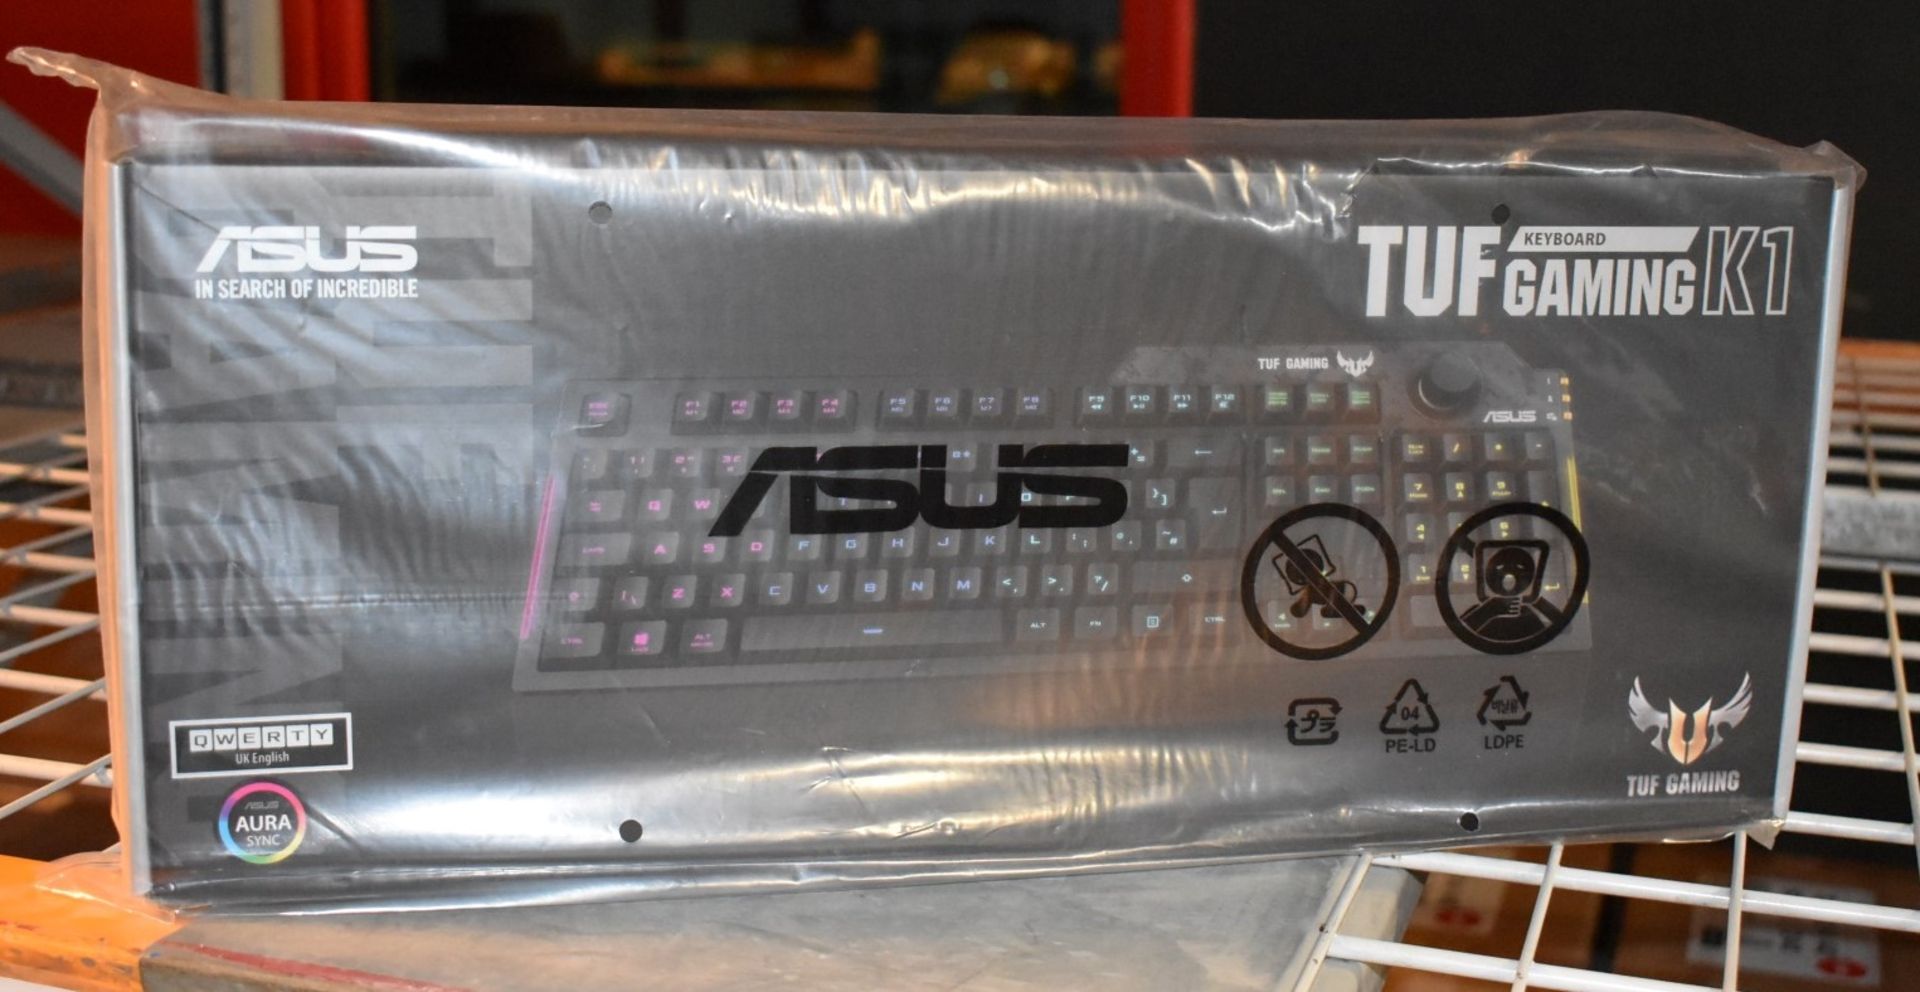 1 x Asus TUF K1 RGB Gaming Keyboard - New Boxed Stock - RRP £49.99 - Features Volume Control, Side - Image 2 of 3